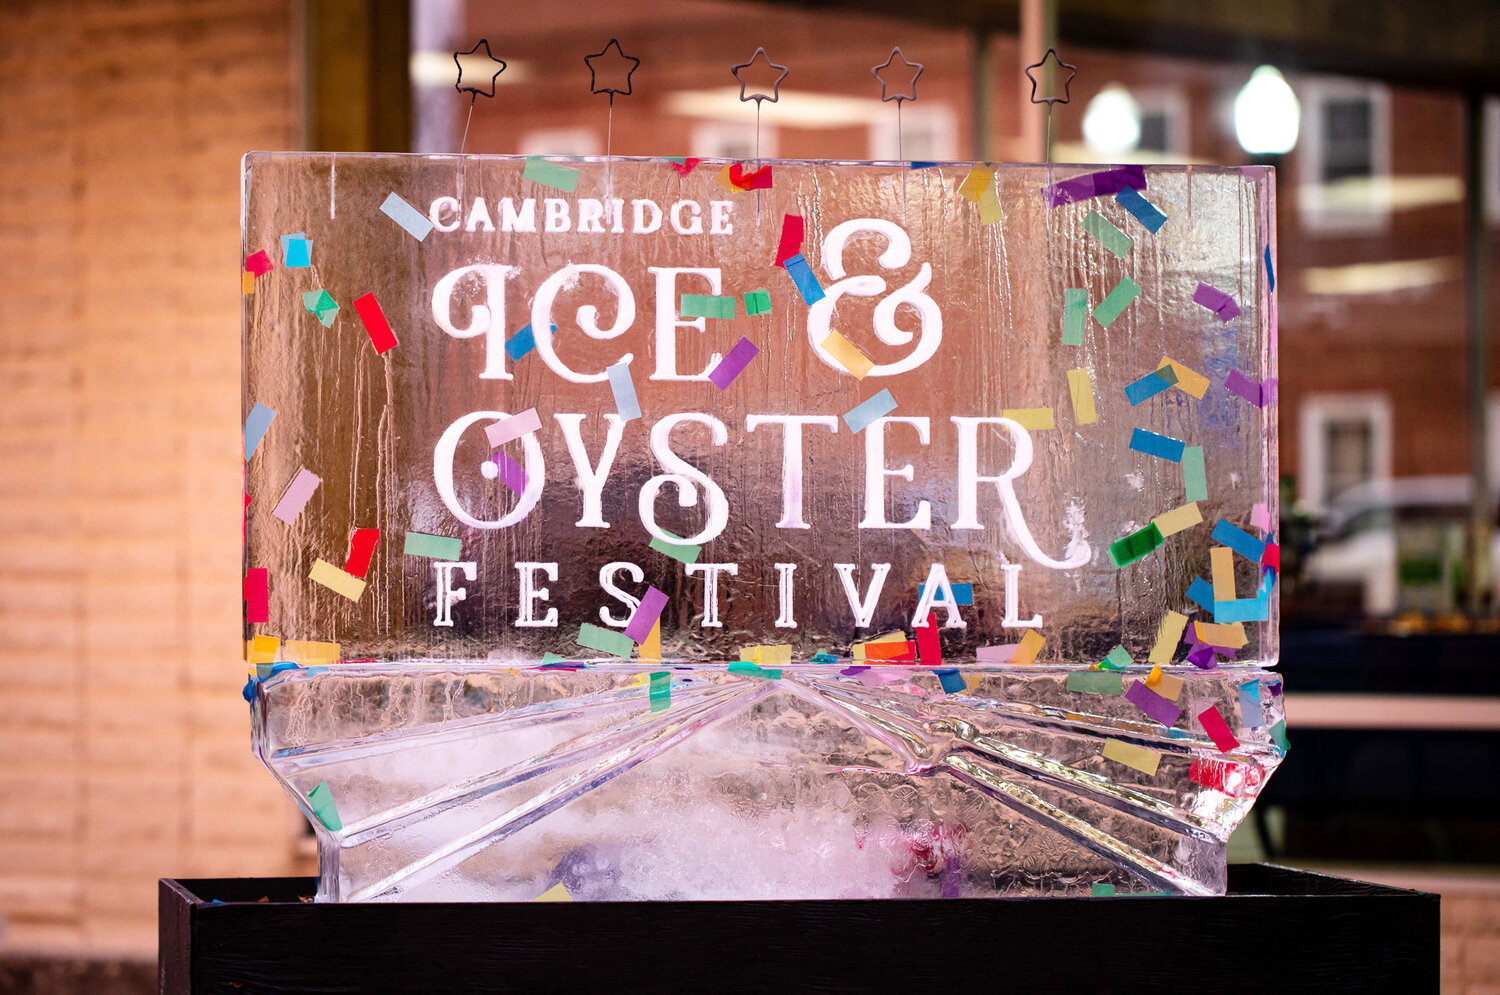 A holiday weekend of winter fun is coming to downtown Cambridge Jan. 12 and 13 when the Cambridge Ice & Oyster Festival returns for its third year with two action-packed days of activities celebrating Maryland’s Eastern Shore.